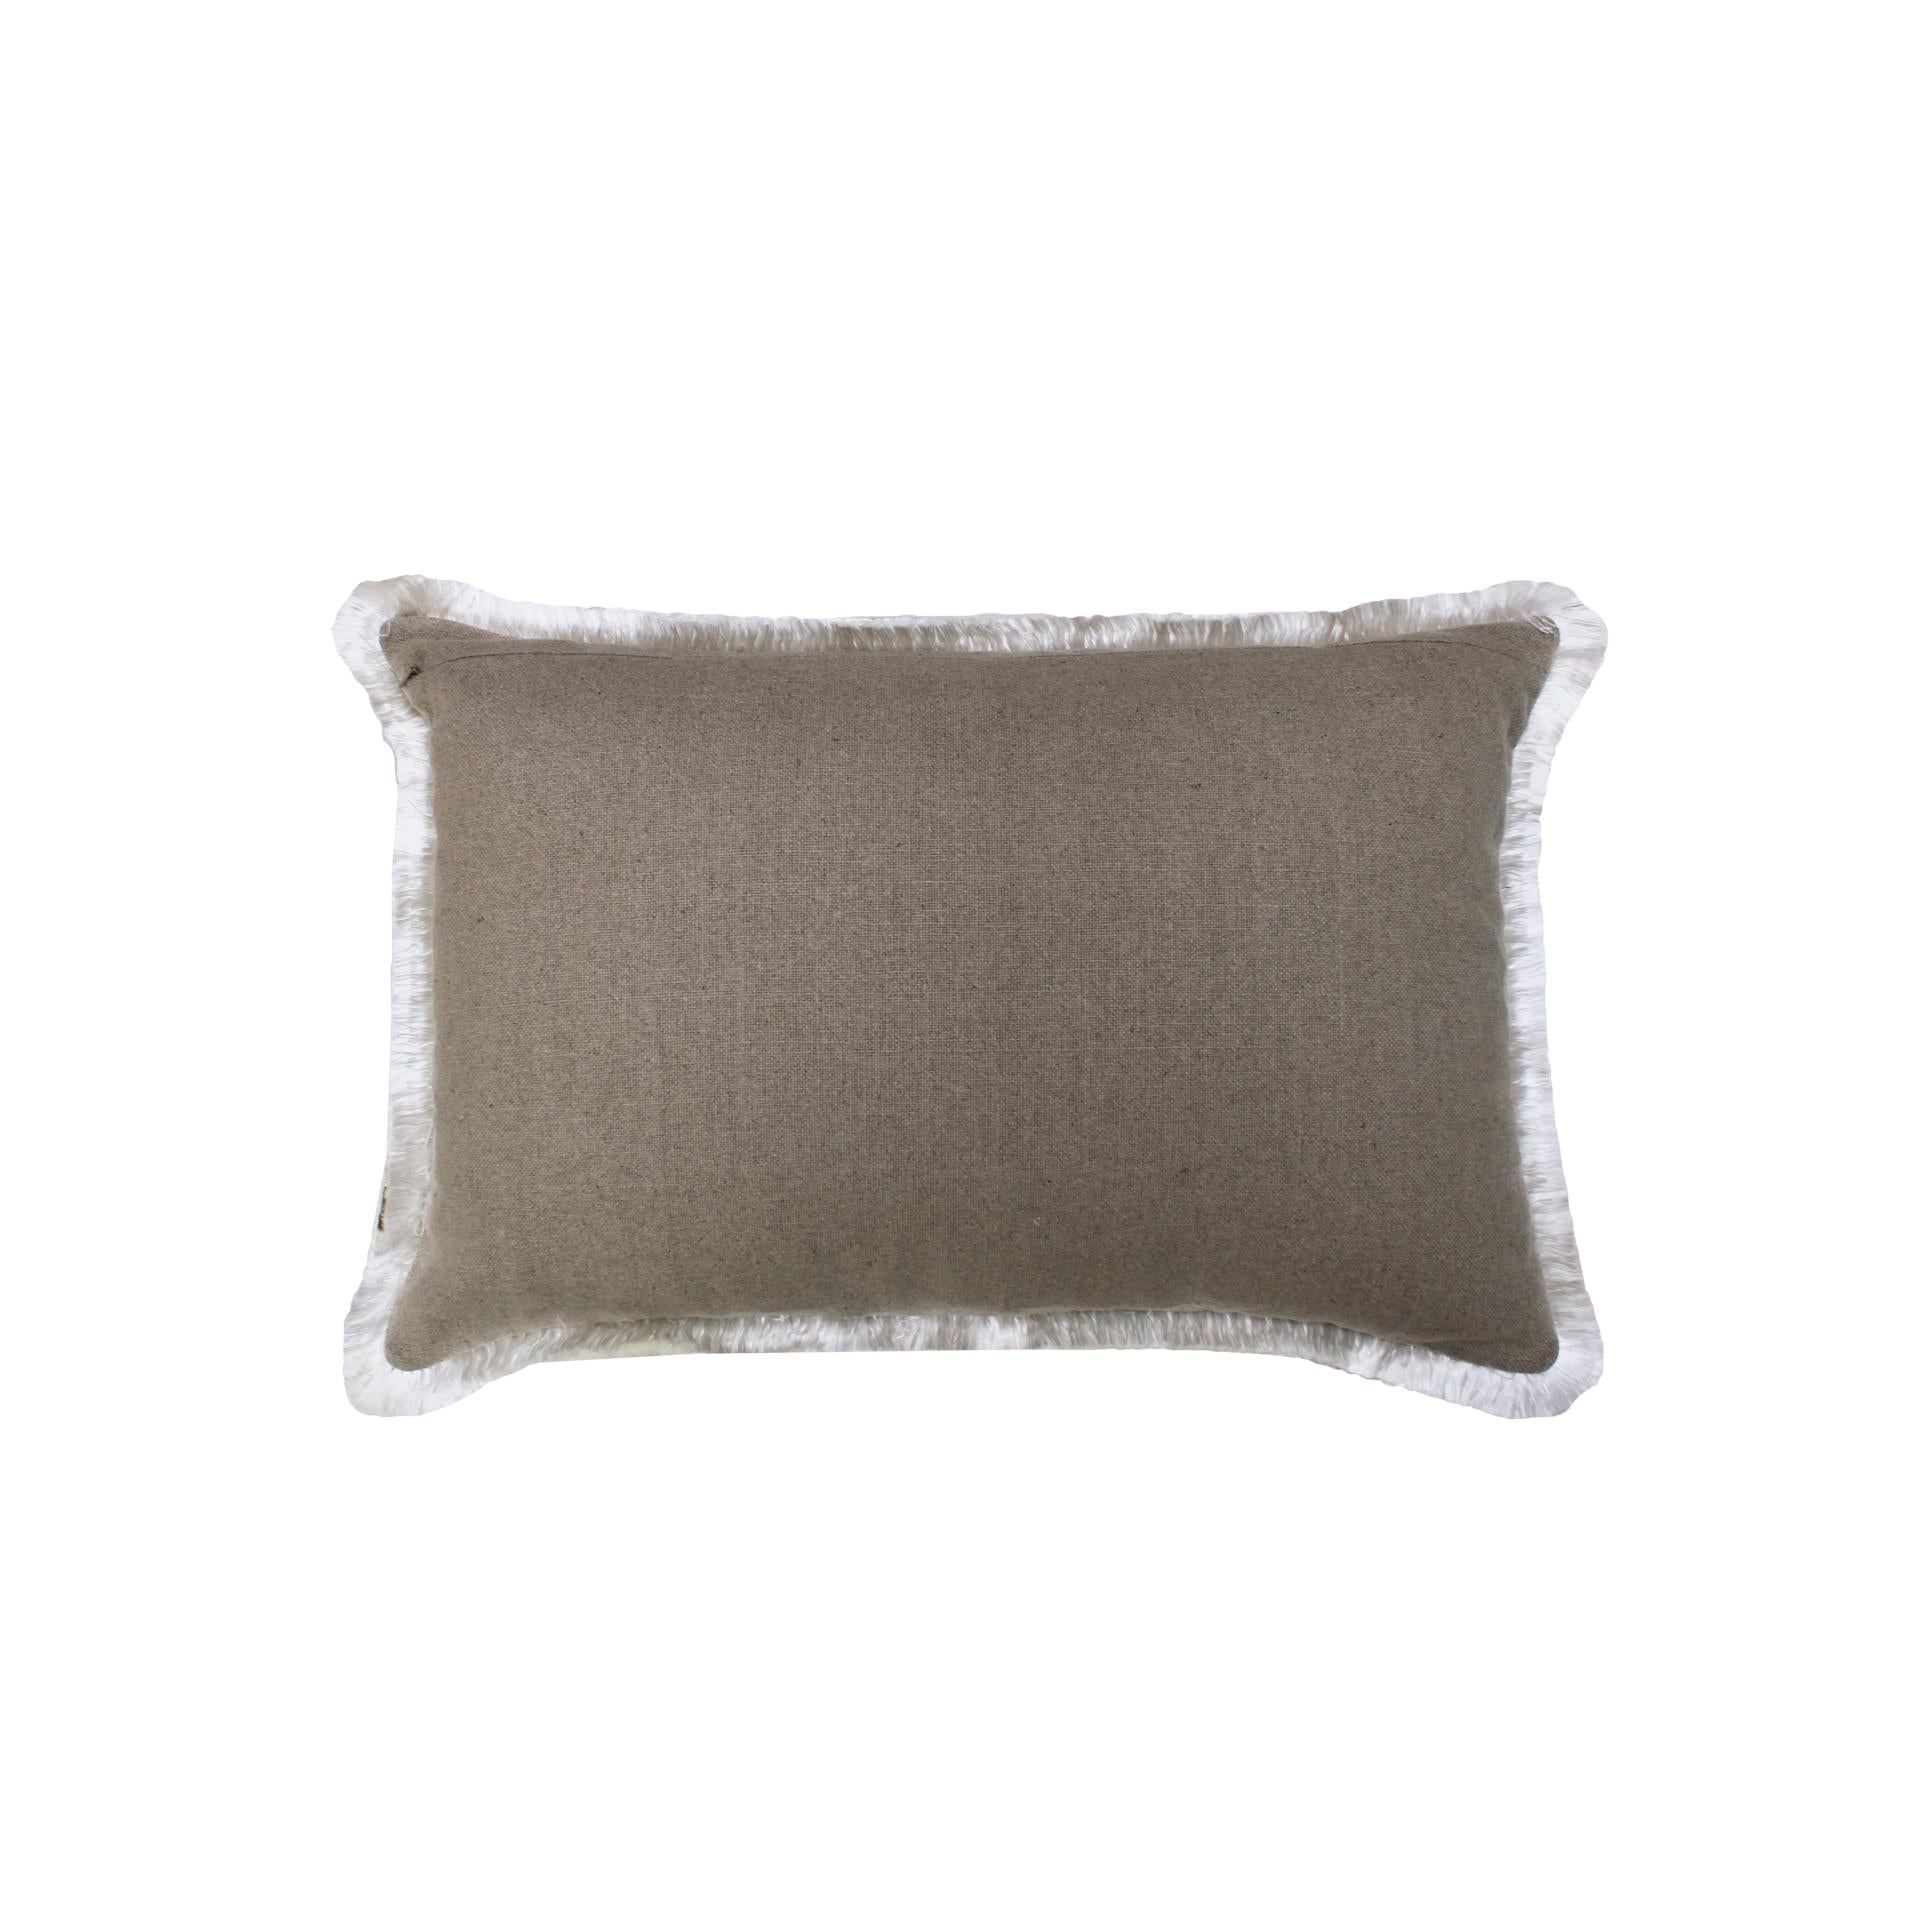 Dark grey velvet cushion in high quality cotton with double black tinsel trim and linen back.

Every item LA Studio offers is checked by our team of 10 craftsmen in our in-house workshop. Special restoration or reupholstery requests can be done.